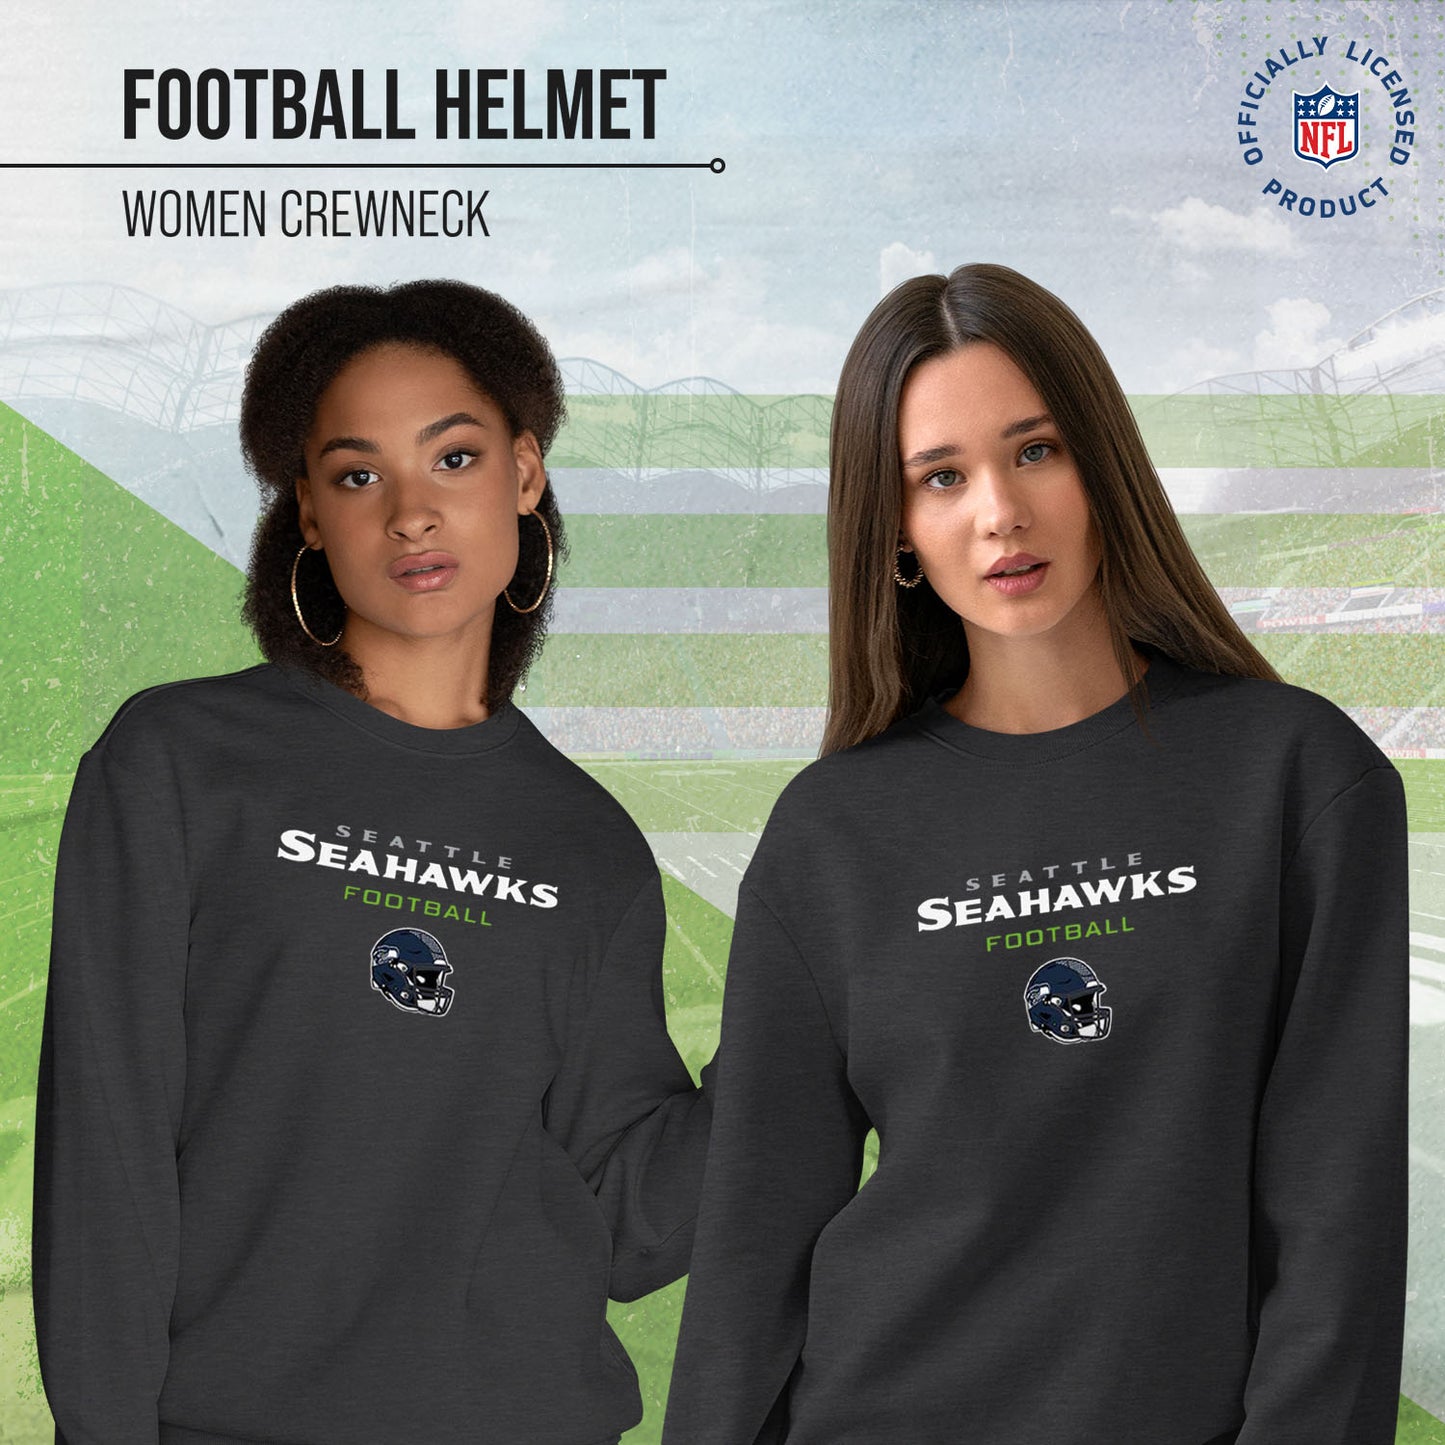 Seattle Seahawks Women's NFL Football Helmet Charcoal Slouchy Crewneck -Tagless Lightweight Pullover - Charcoal